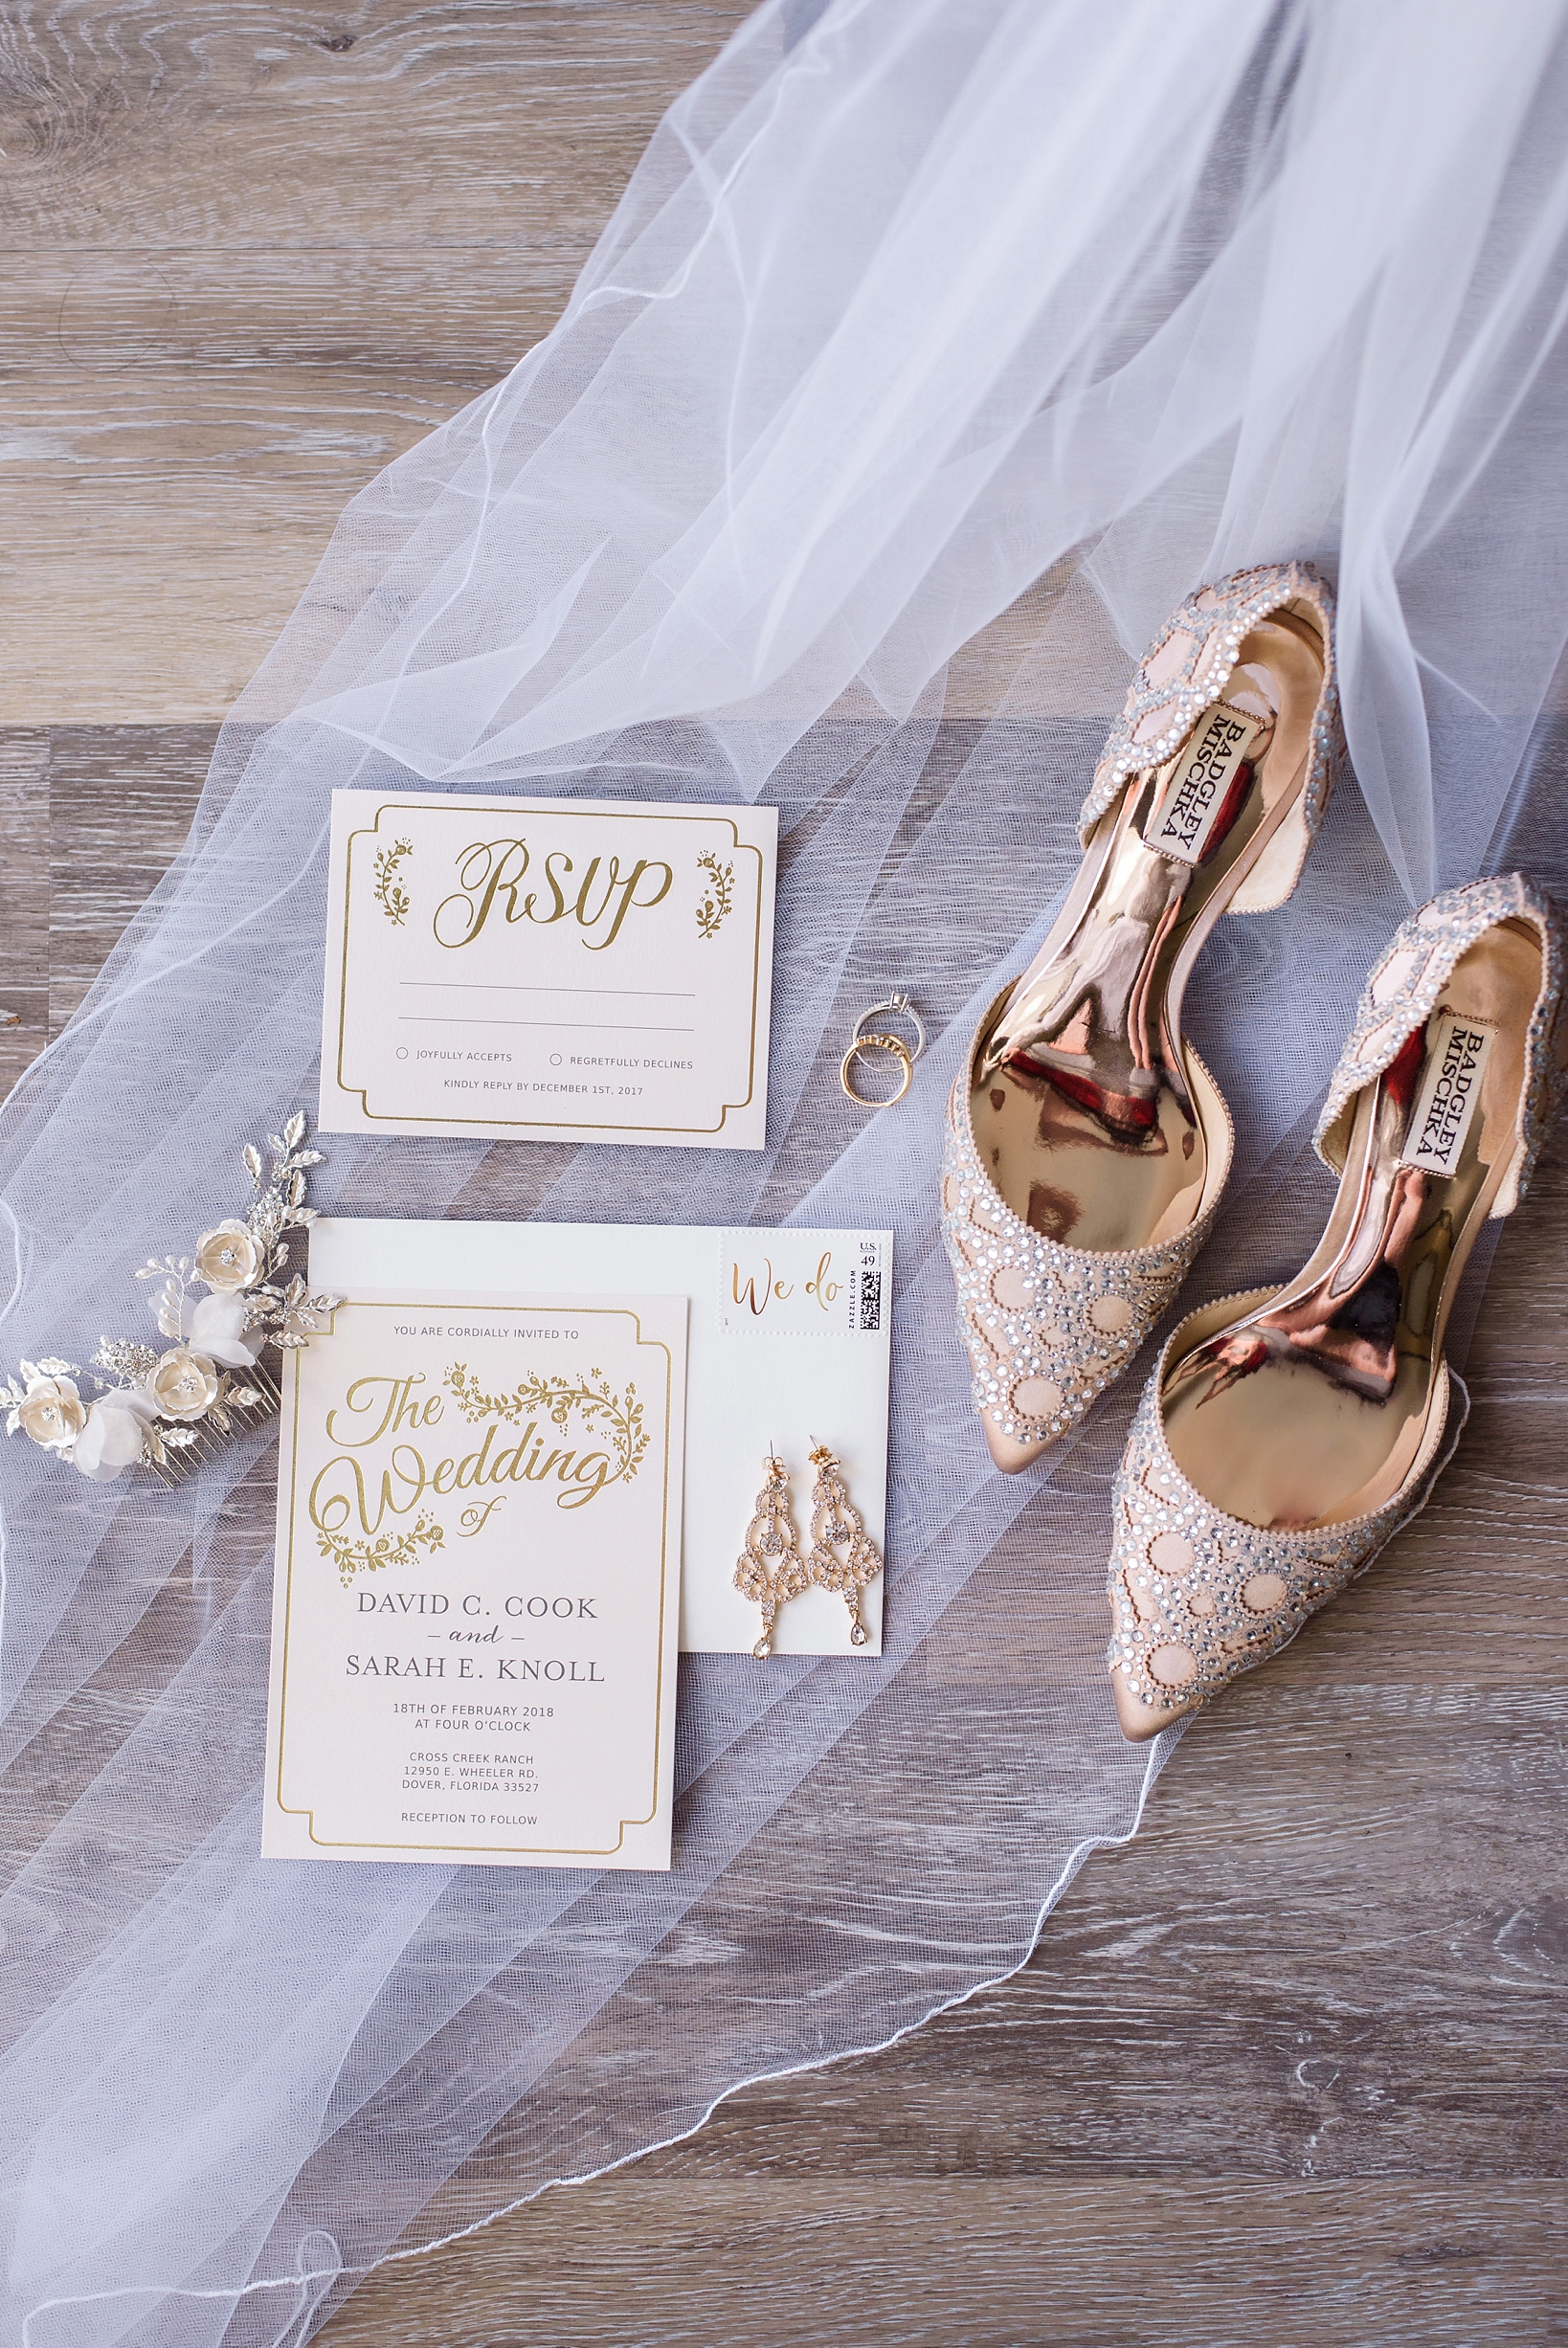 Bridal shoes on a hardwood floor surrounded by the bride's veil